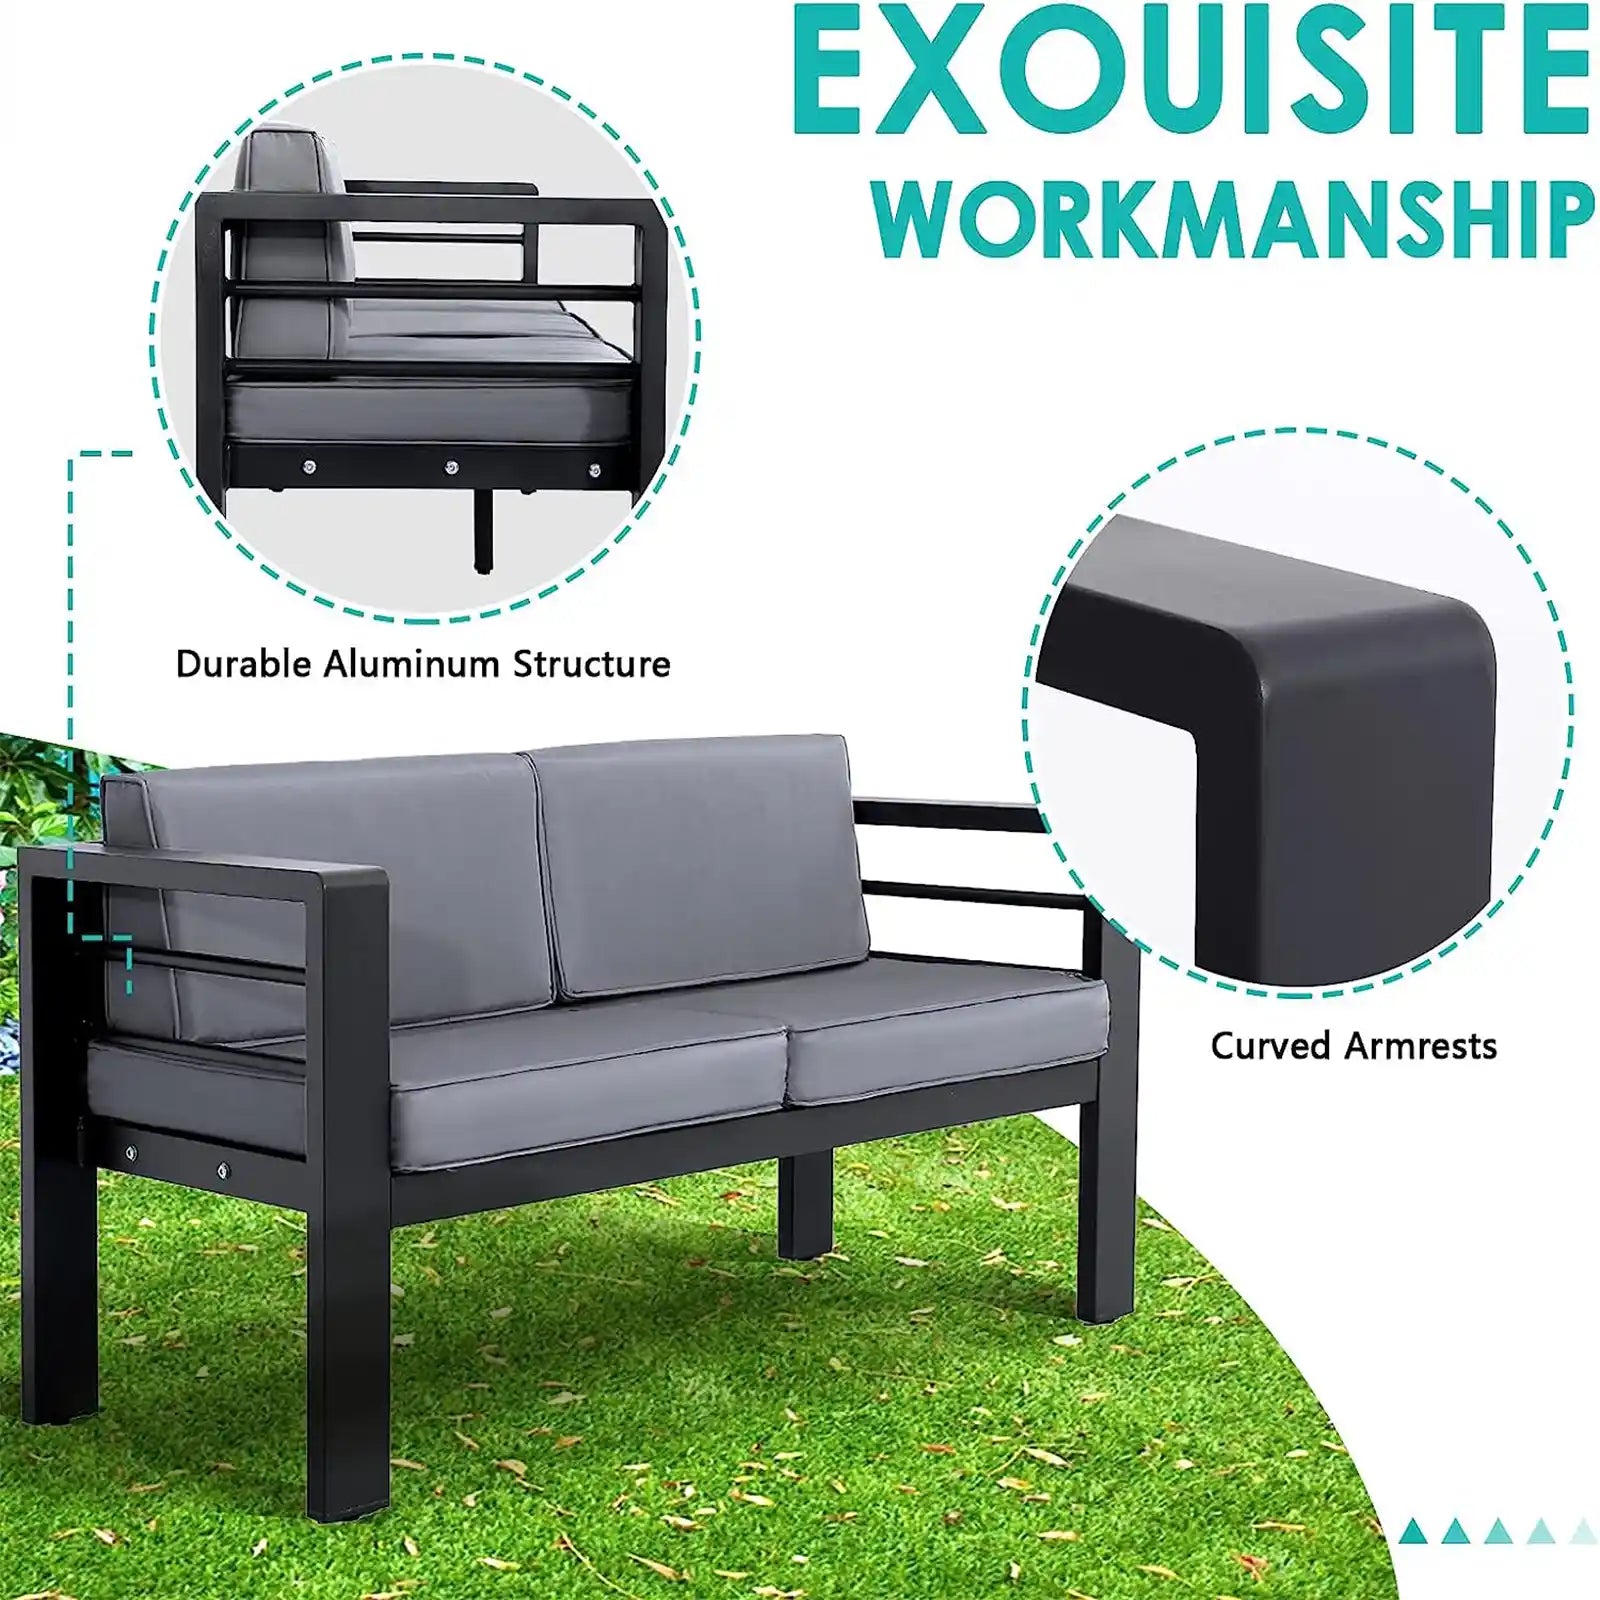 Oversized Aluminium Patio Furniture Set, 7 Pieces Modern Outdoor All-Weather Modern Sectional Sofa, Conversation Set with Grey Comfort Cushions,Ottomans and Table